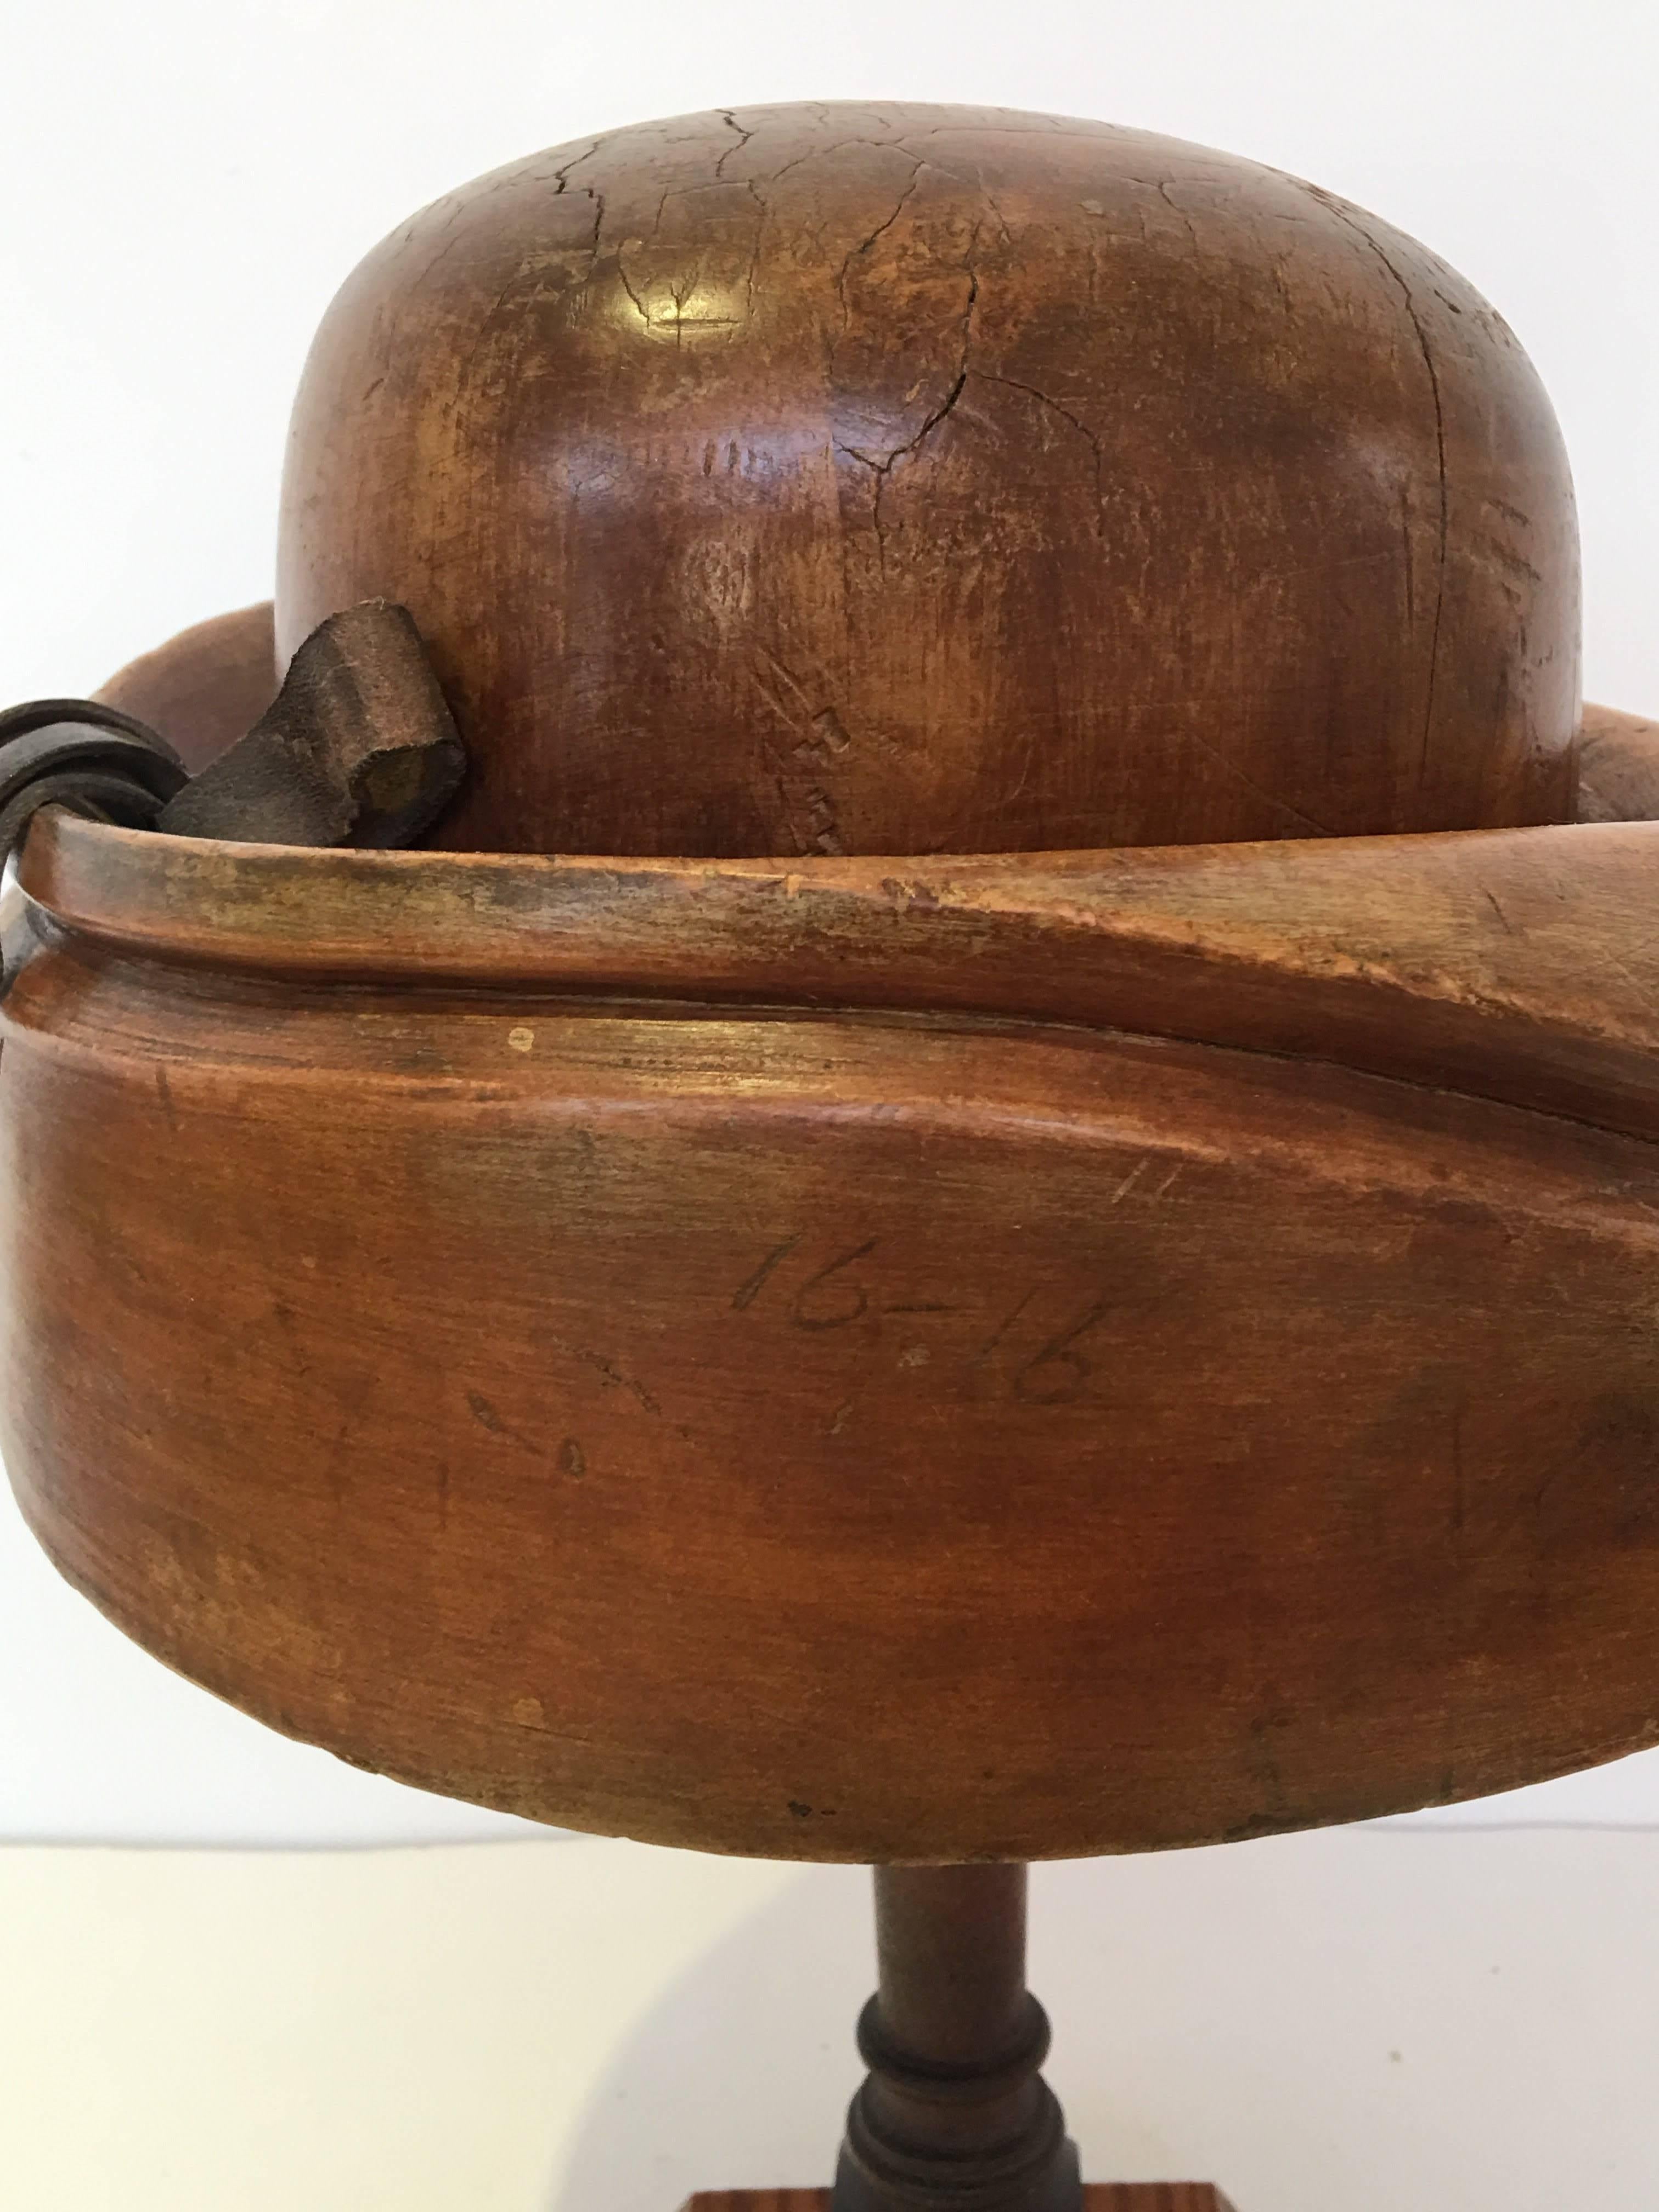 English wood hat mold on wood stand.
Brimmed hat with leather bow
circa 1940s #2476.